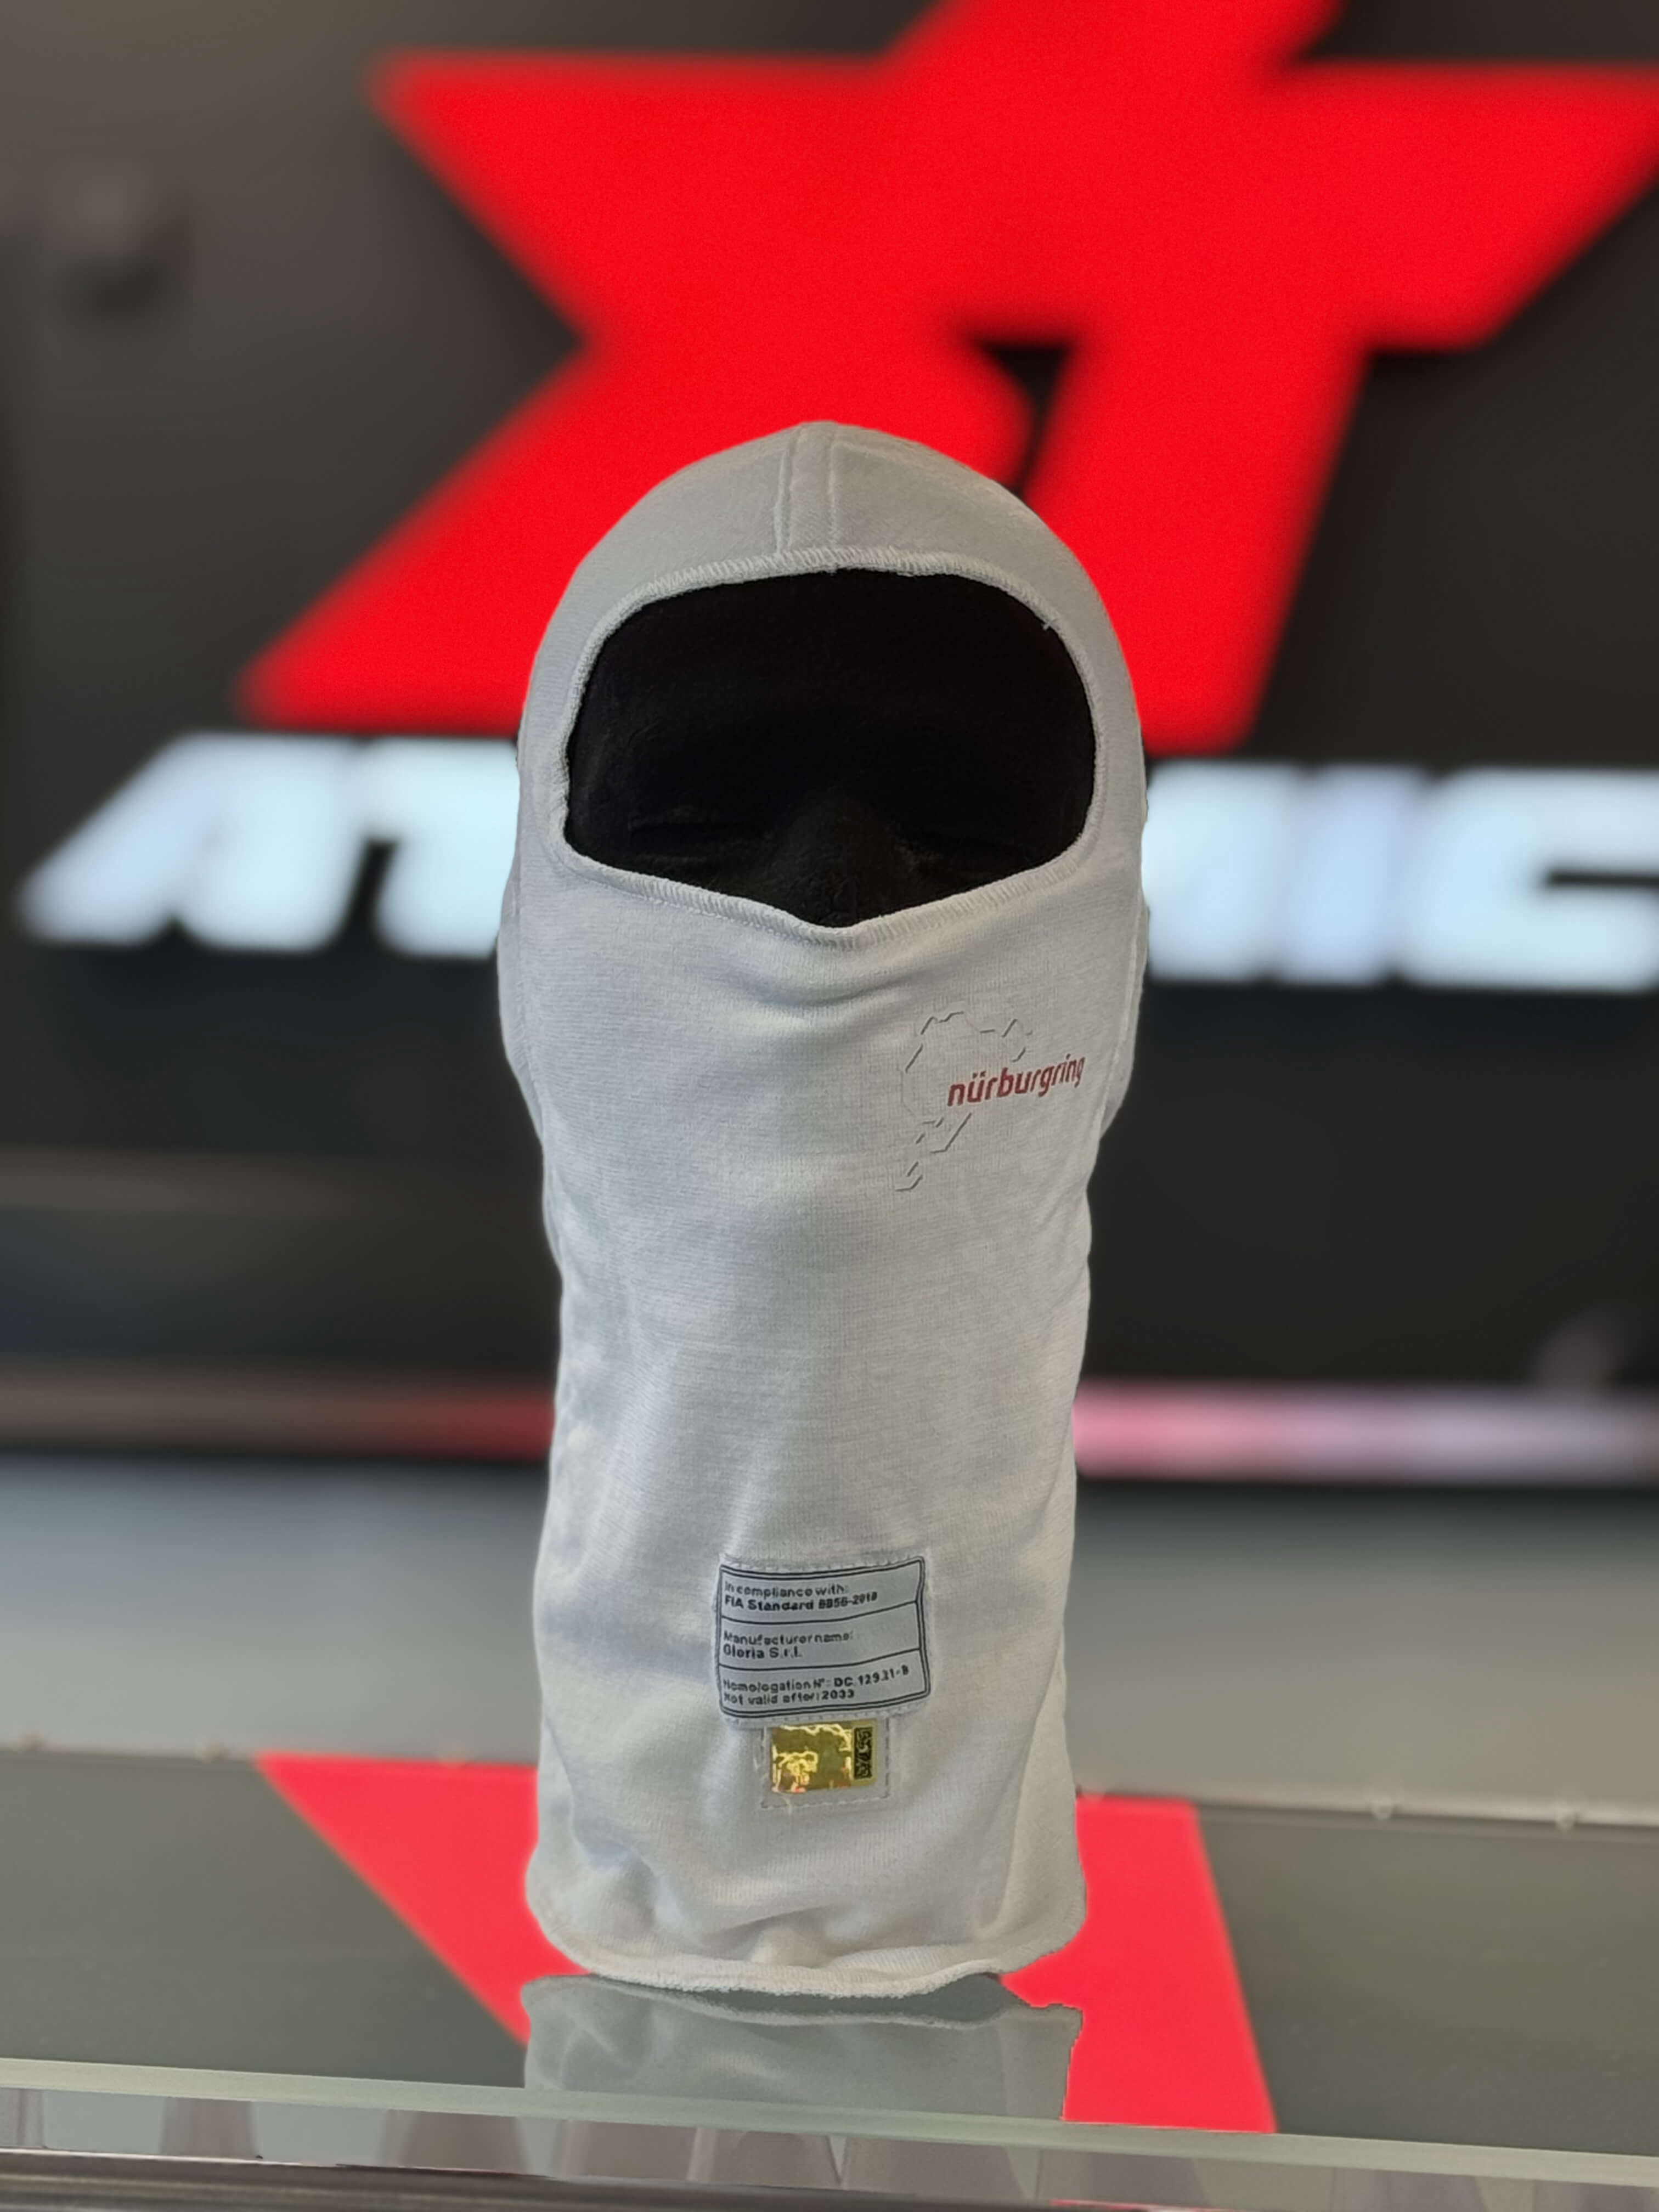 ARD AT018AZW-NBR Balaclava Atomic Nürburgring Edition FIA, White, One Size (Officially Licensed Nürburgring Product) Photo-0 